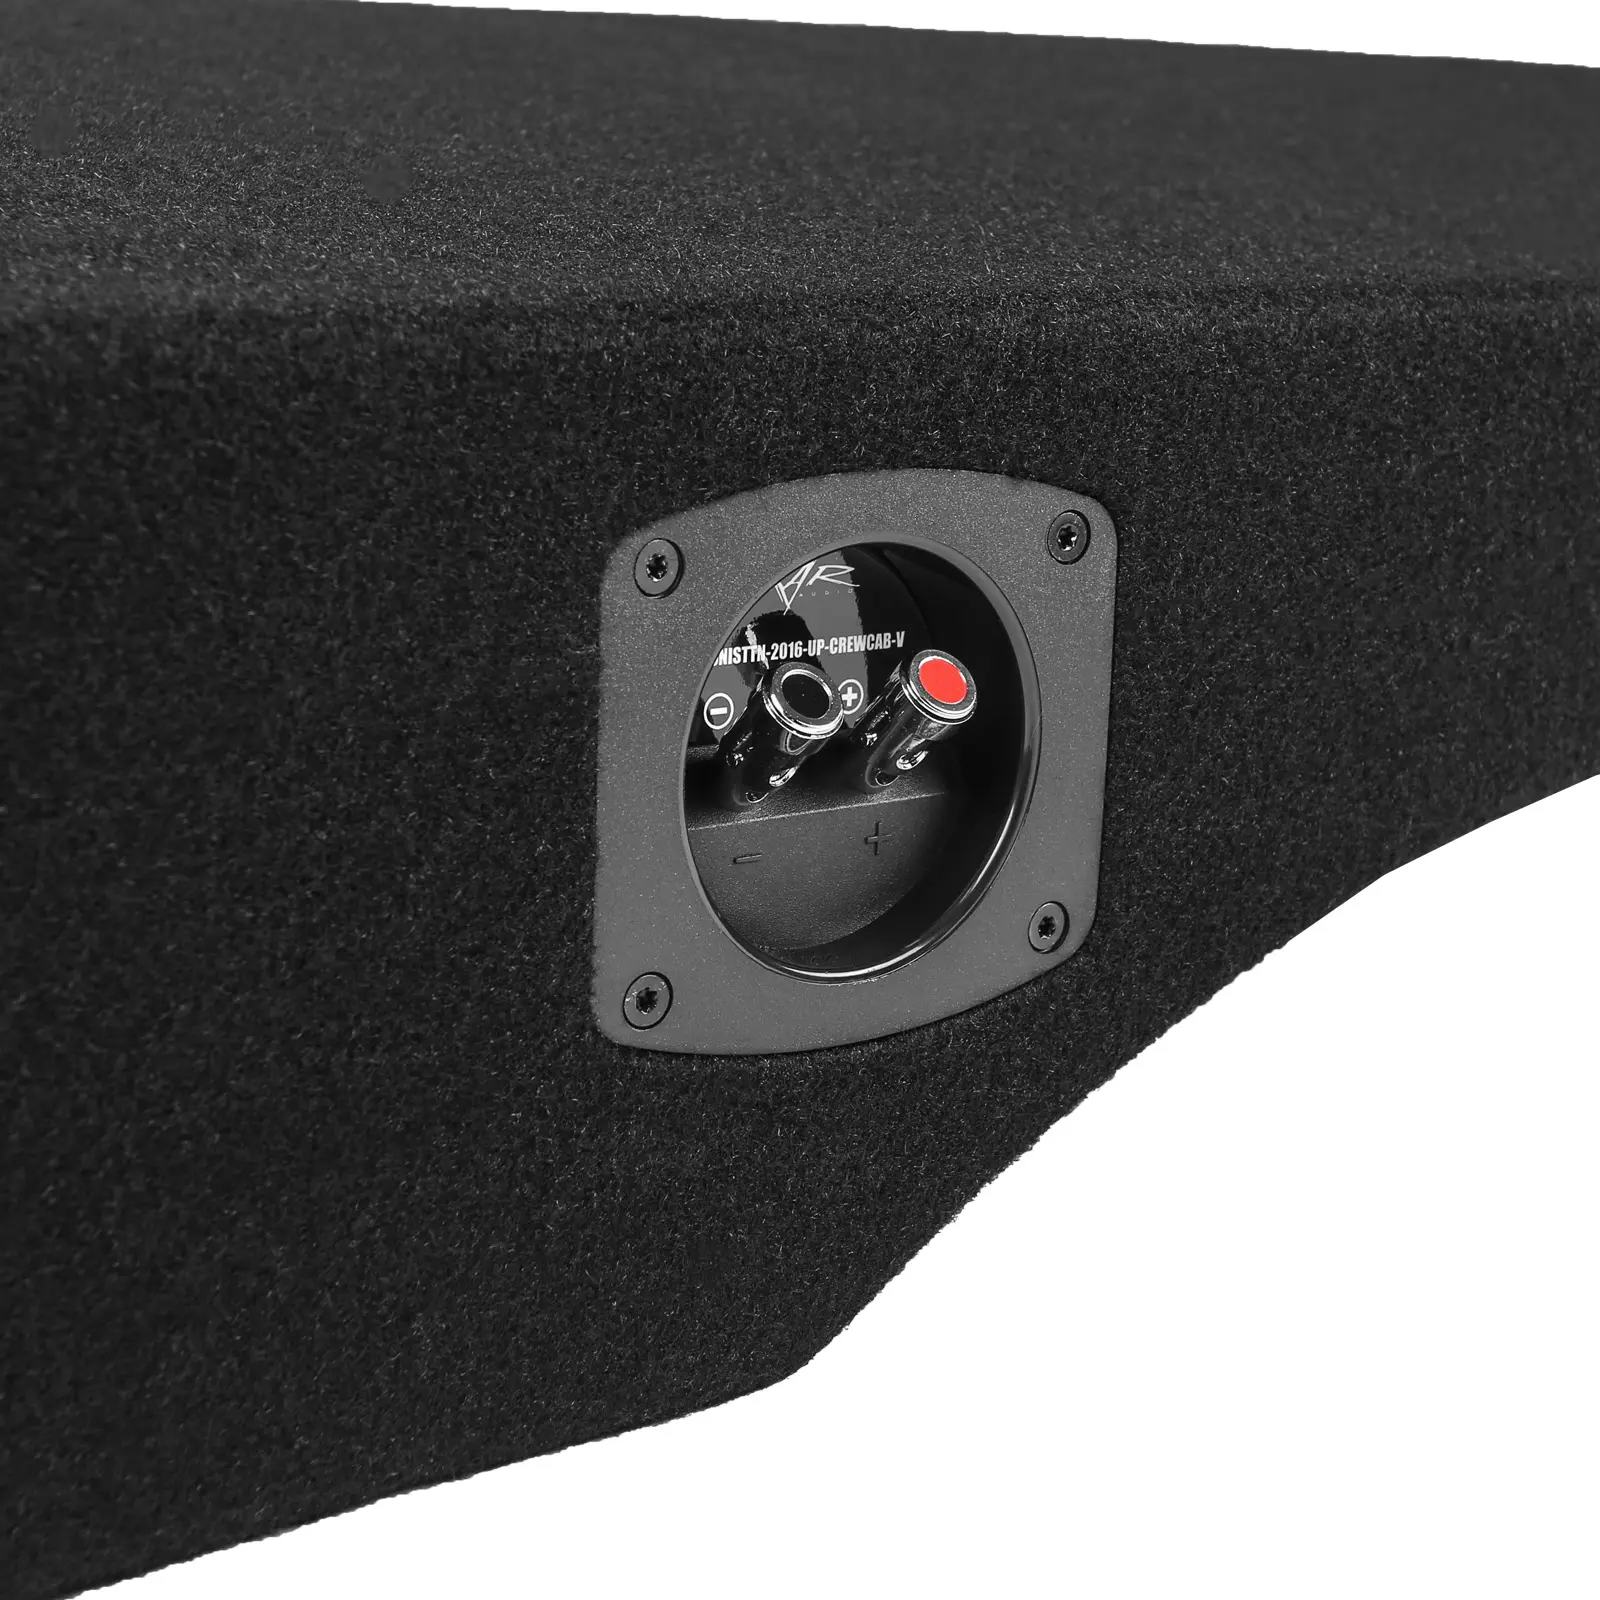 Dual 10" 1,600W Max Power Loaded Ported Subwoofer Enclosure Compatible with 2016-2024 Nissan Titan Crew Cab Trucks #6